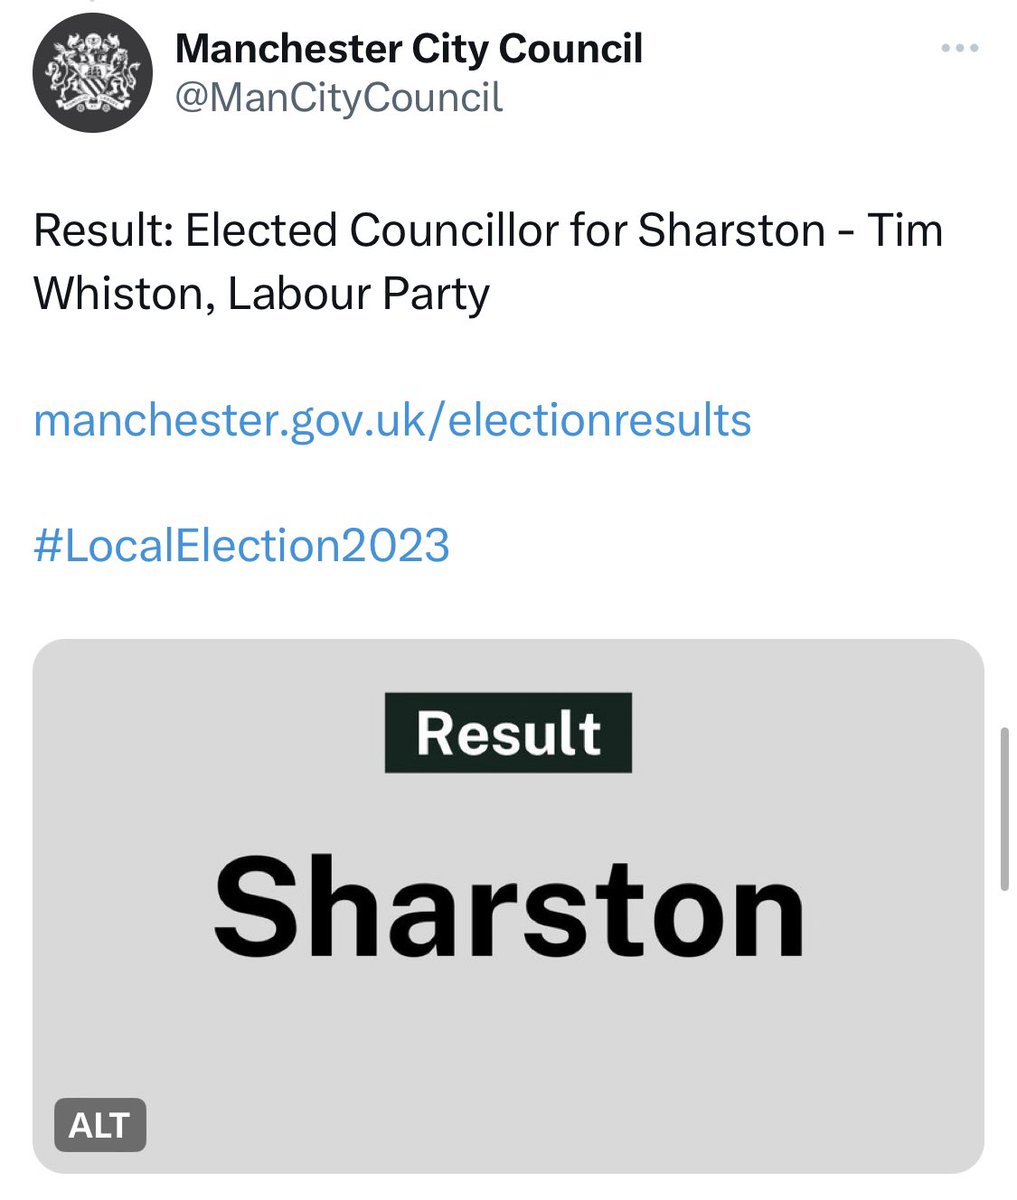 It is a honour and a privilege to be re-elected with an increased majority by the people of Wythenshawe living in Sharston ward. Thank you for your support. I will continue to work hard and be a voice for those that need it most 🌹